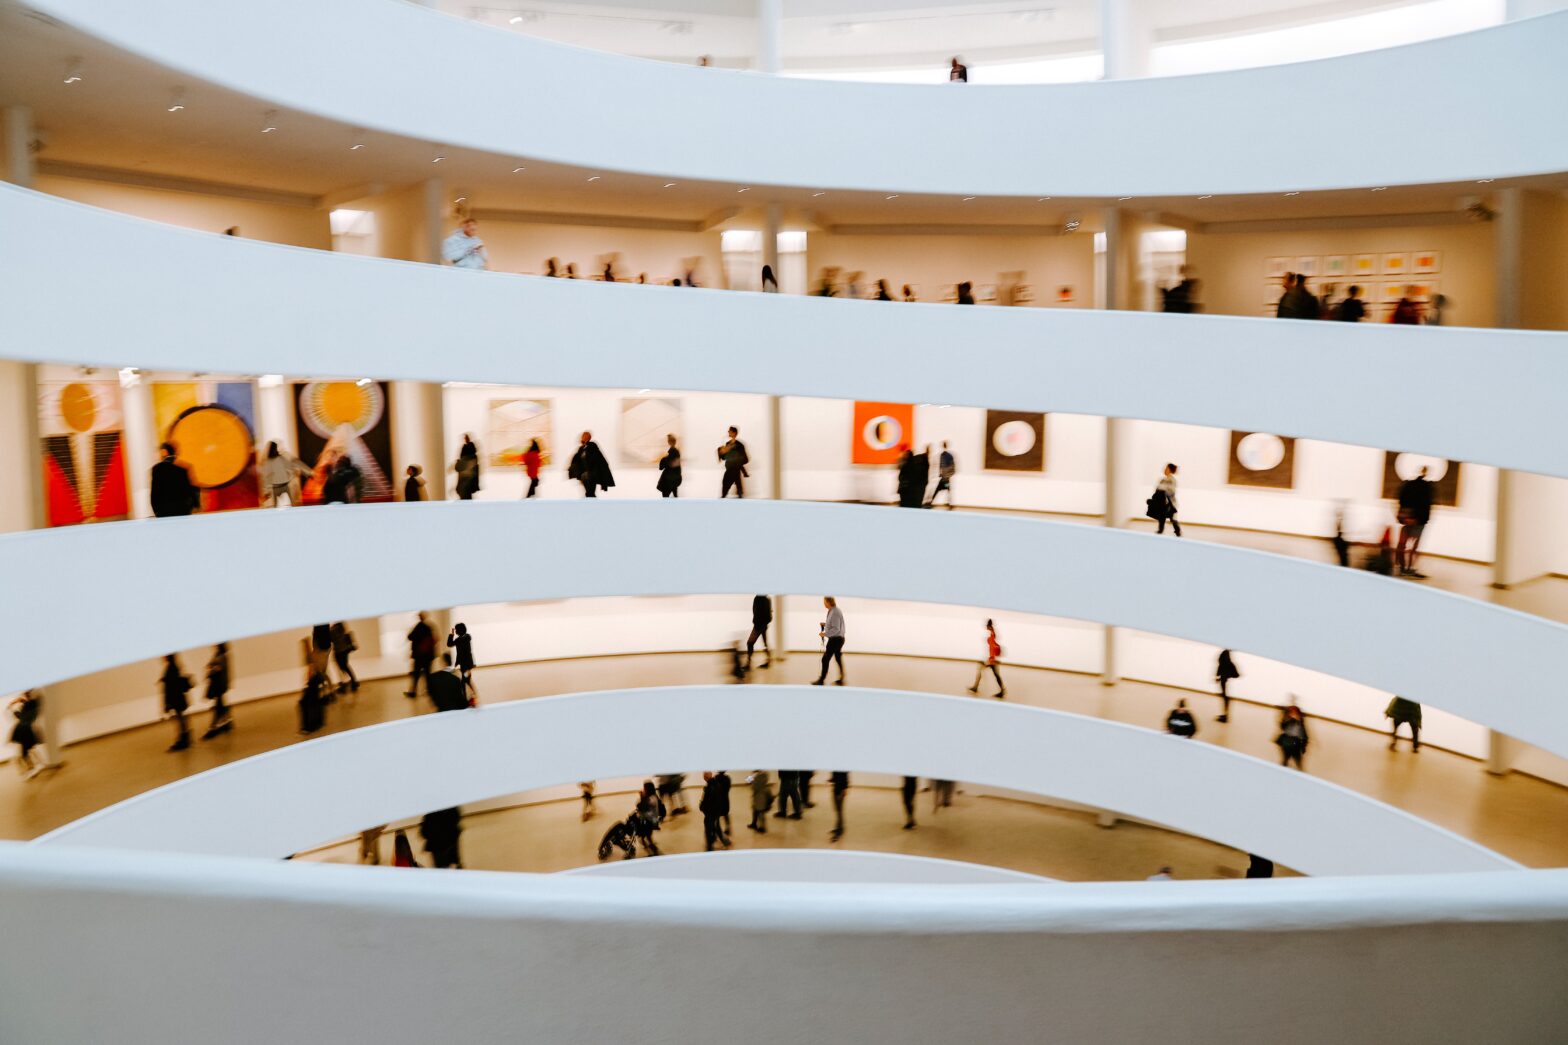 Guggenheim Museum in NYC Increases Entry Fee This Summer